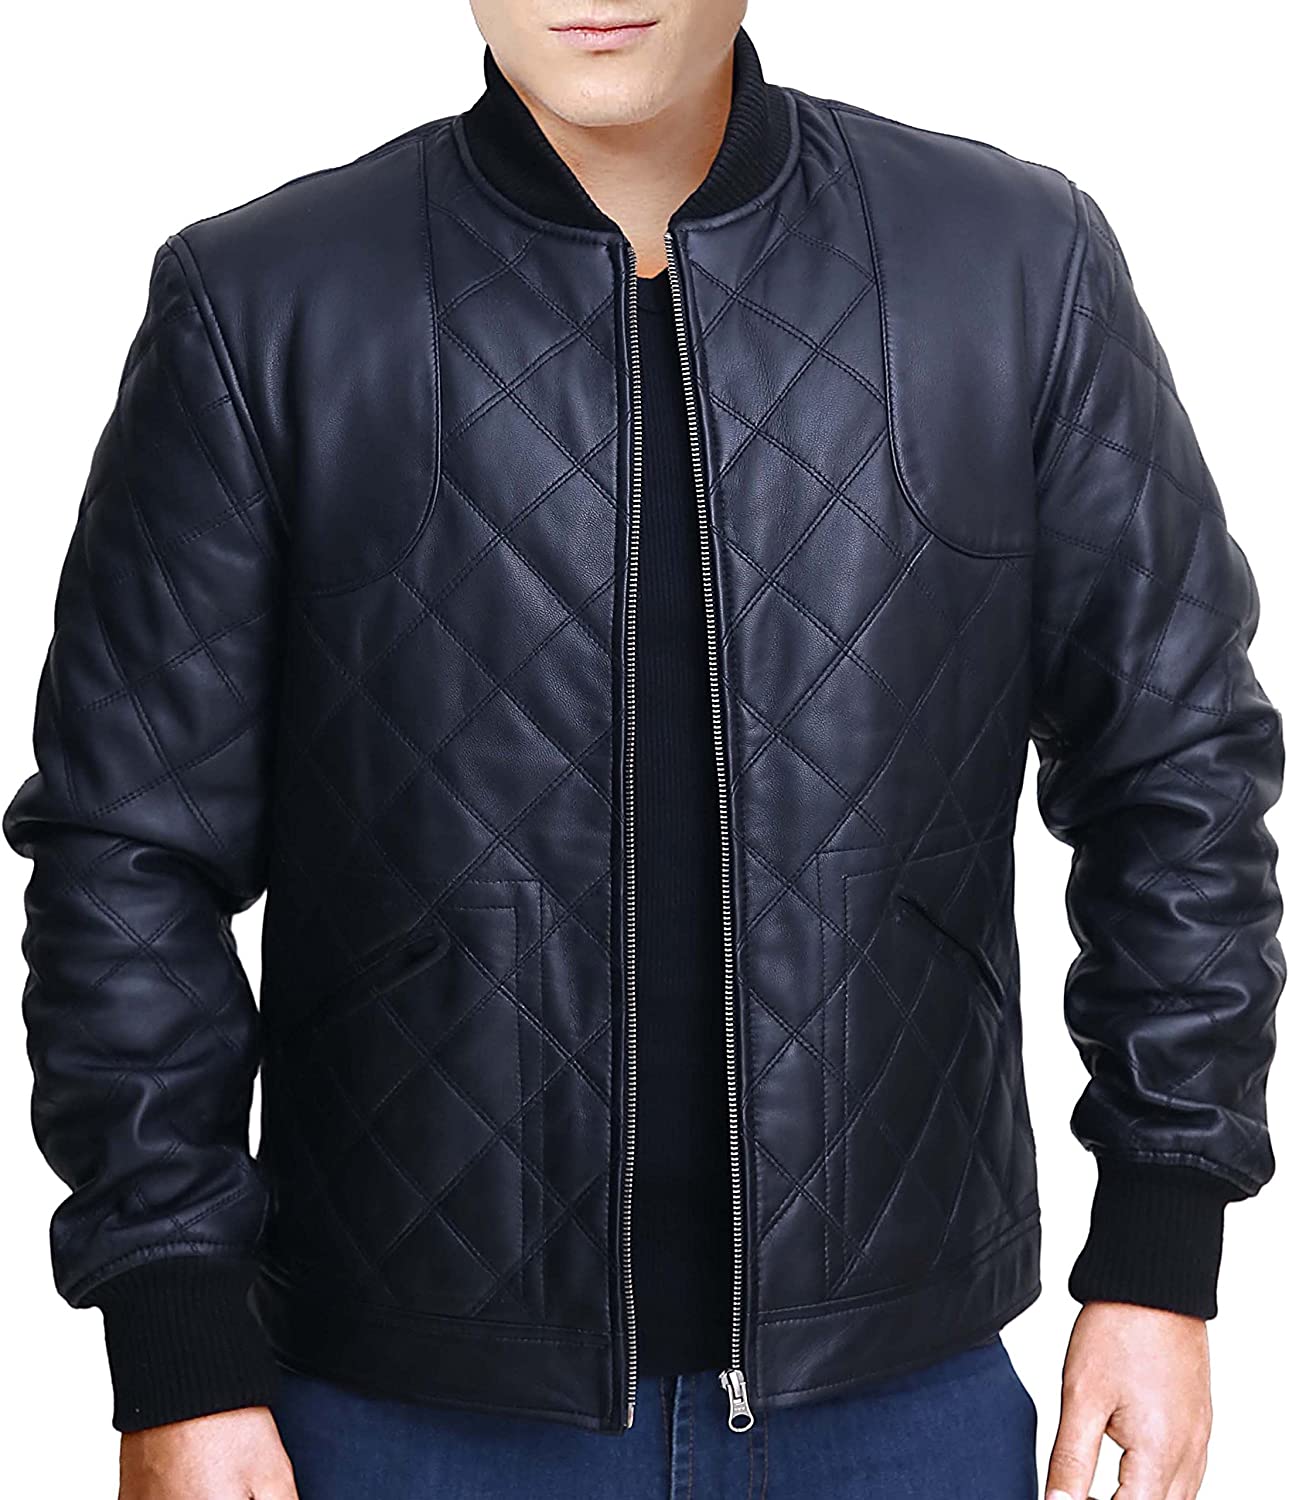 Snazzy David Beckham Full Quilted Black Leather Jacket - XL